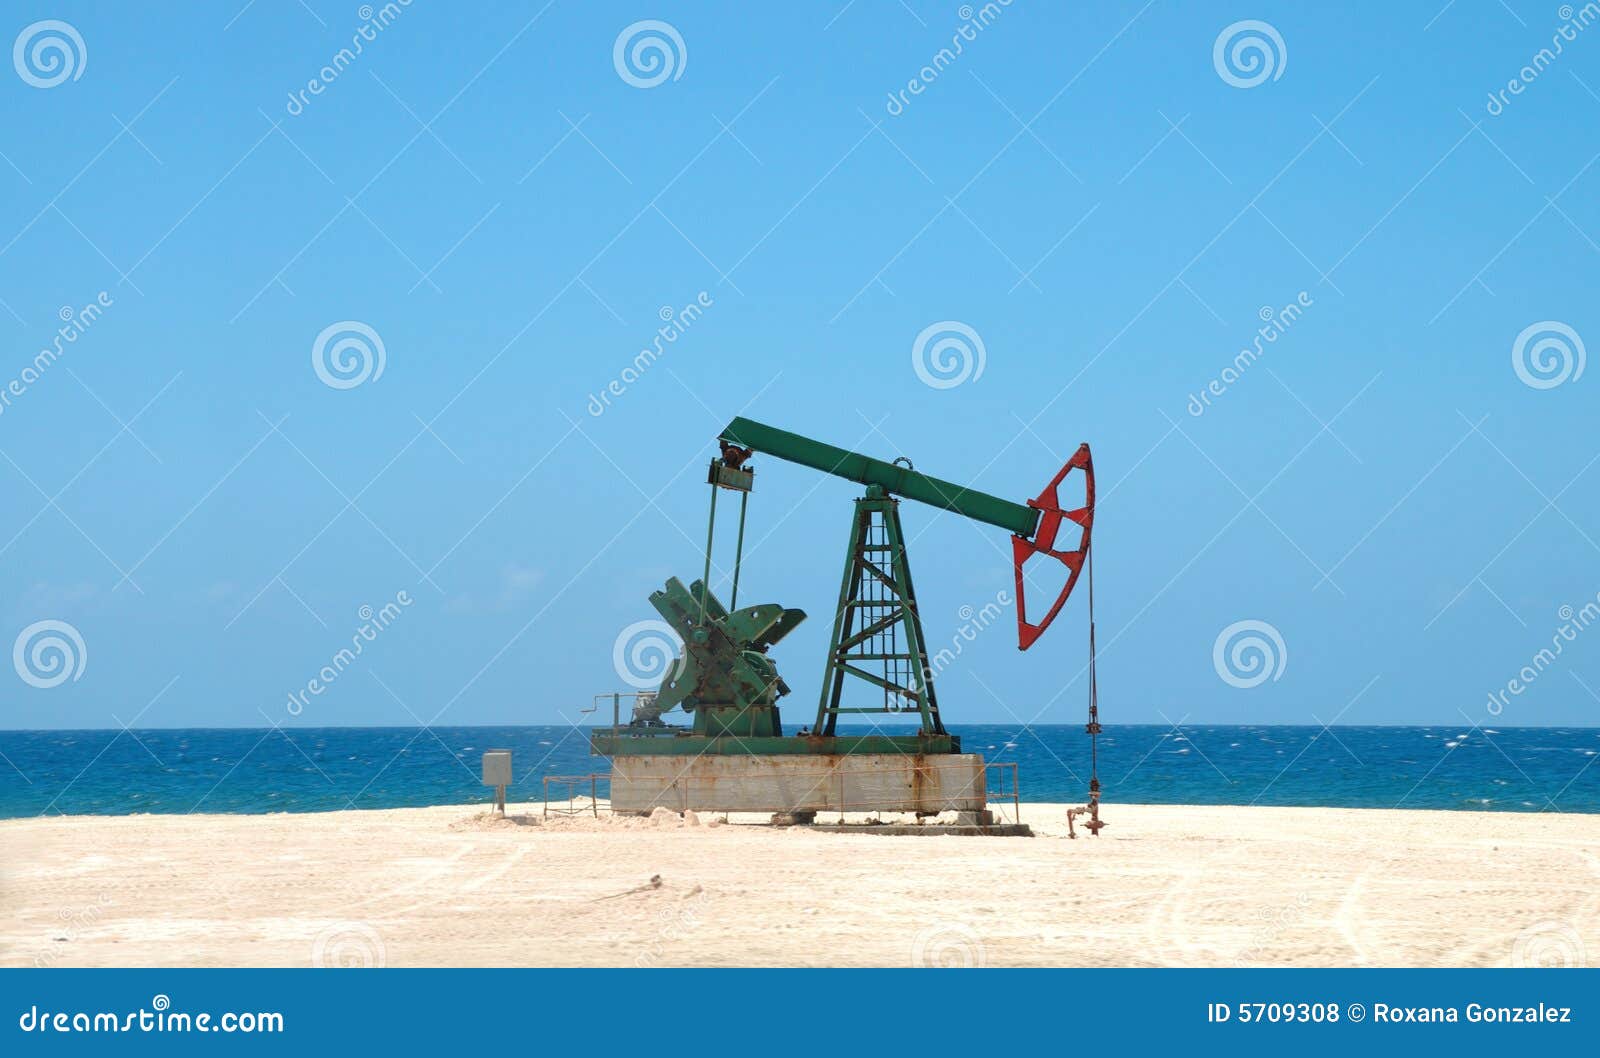 Petroleum Extraction On Cuban Soil Stock Photo - Image of ...